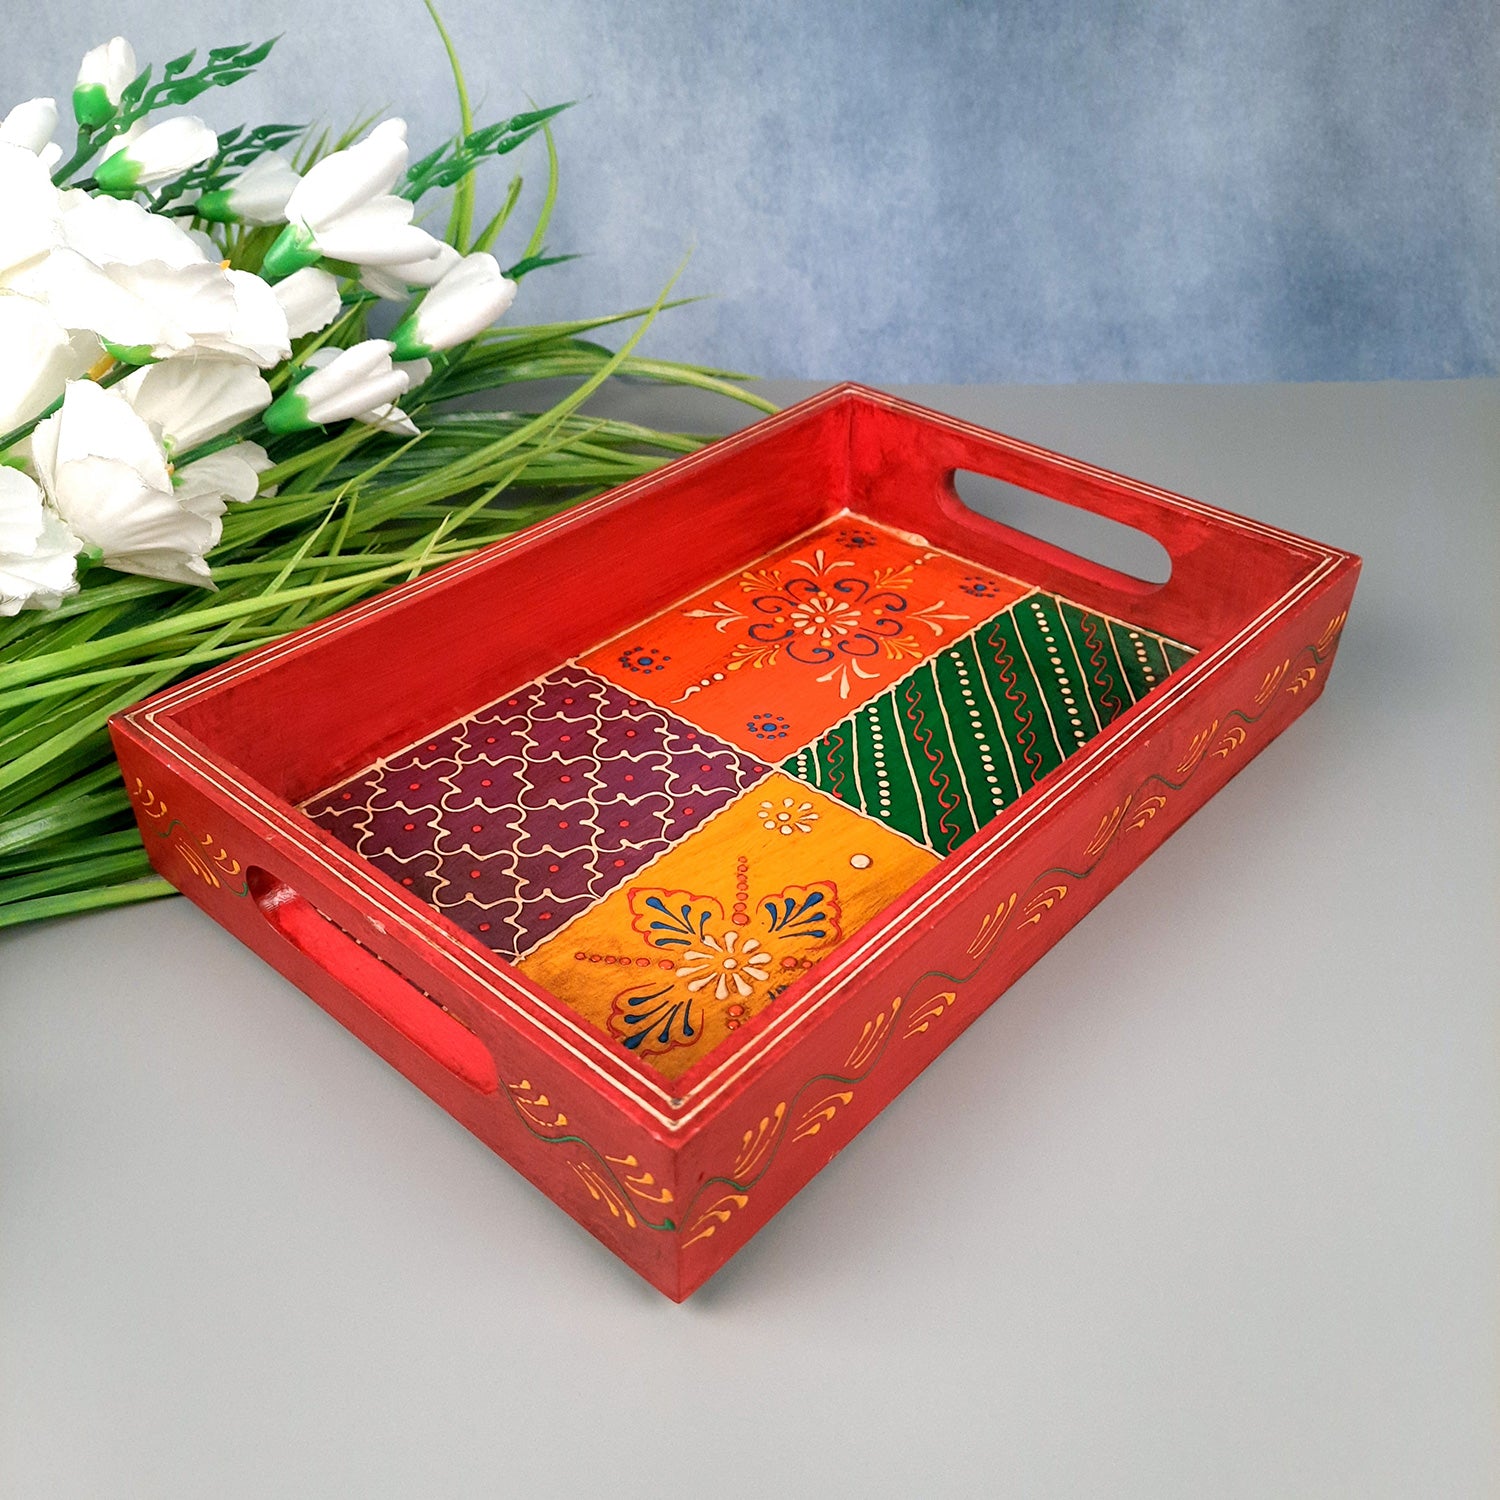 Serving Tray | Tea & Snacks Serving Platter Wooden | Tray With Handles - for Home, Dining Table, Kitchen Decor, Restaurants, Office, Cafe & Gifts - 12 Inch - Apkamart